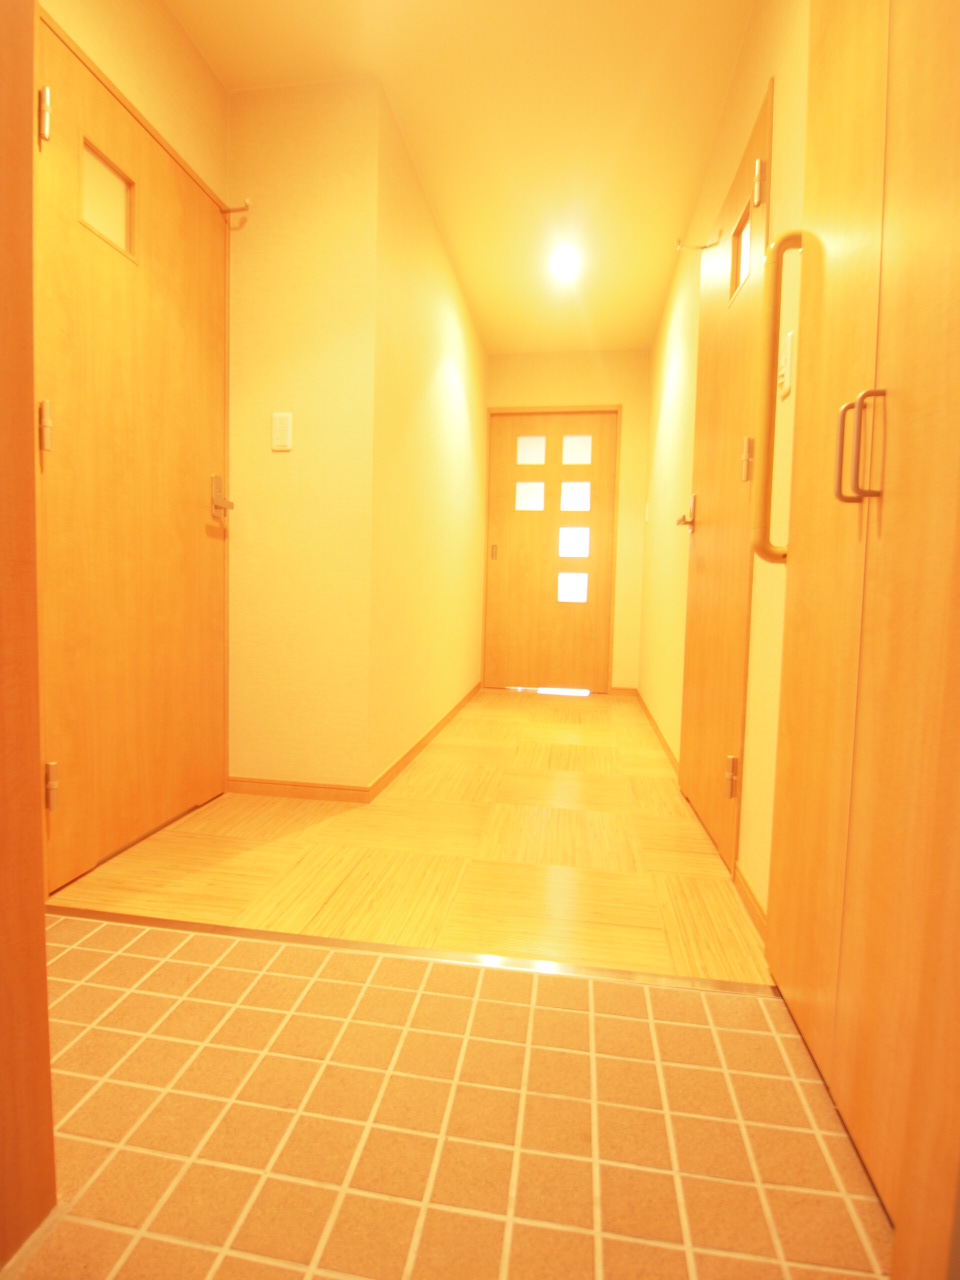 Entrance. Is a fashionable entrance because designer apartment ☆ 